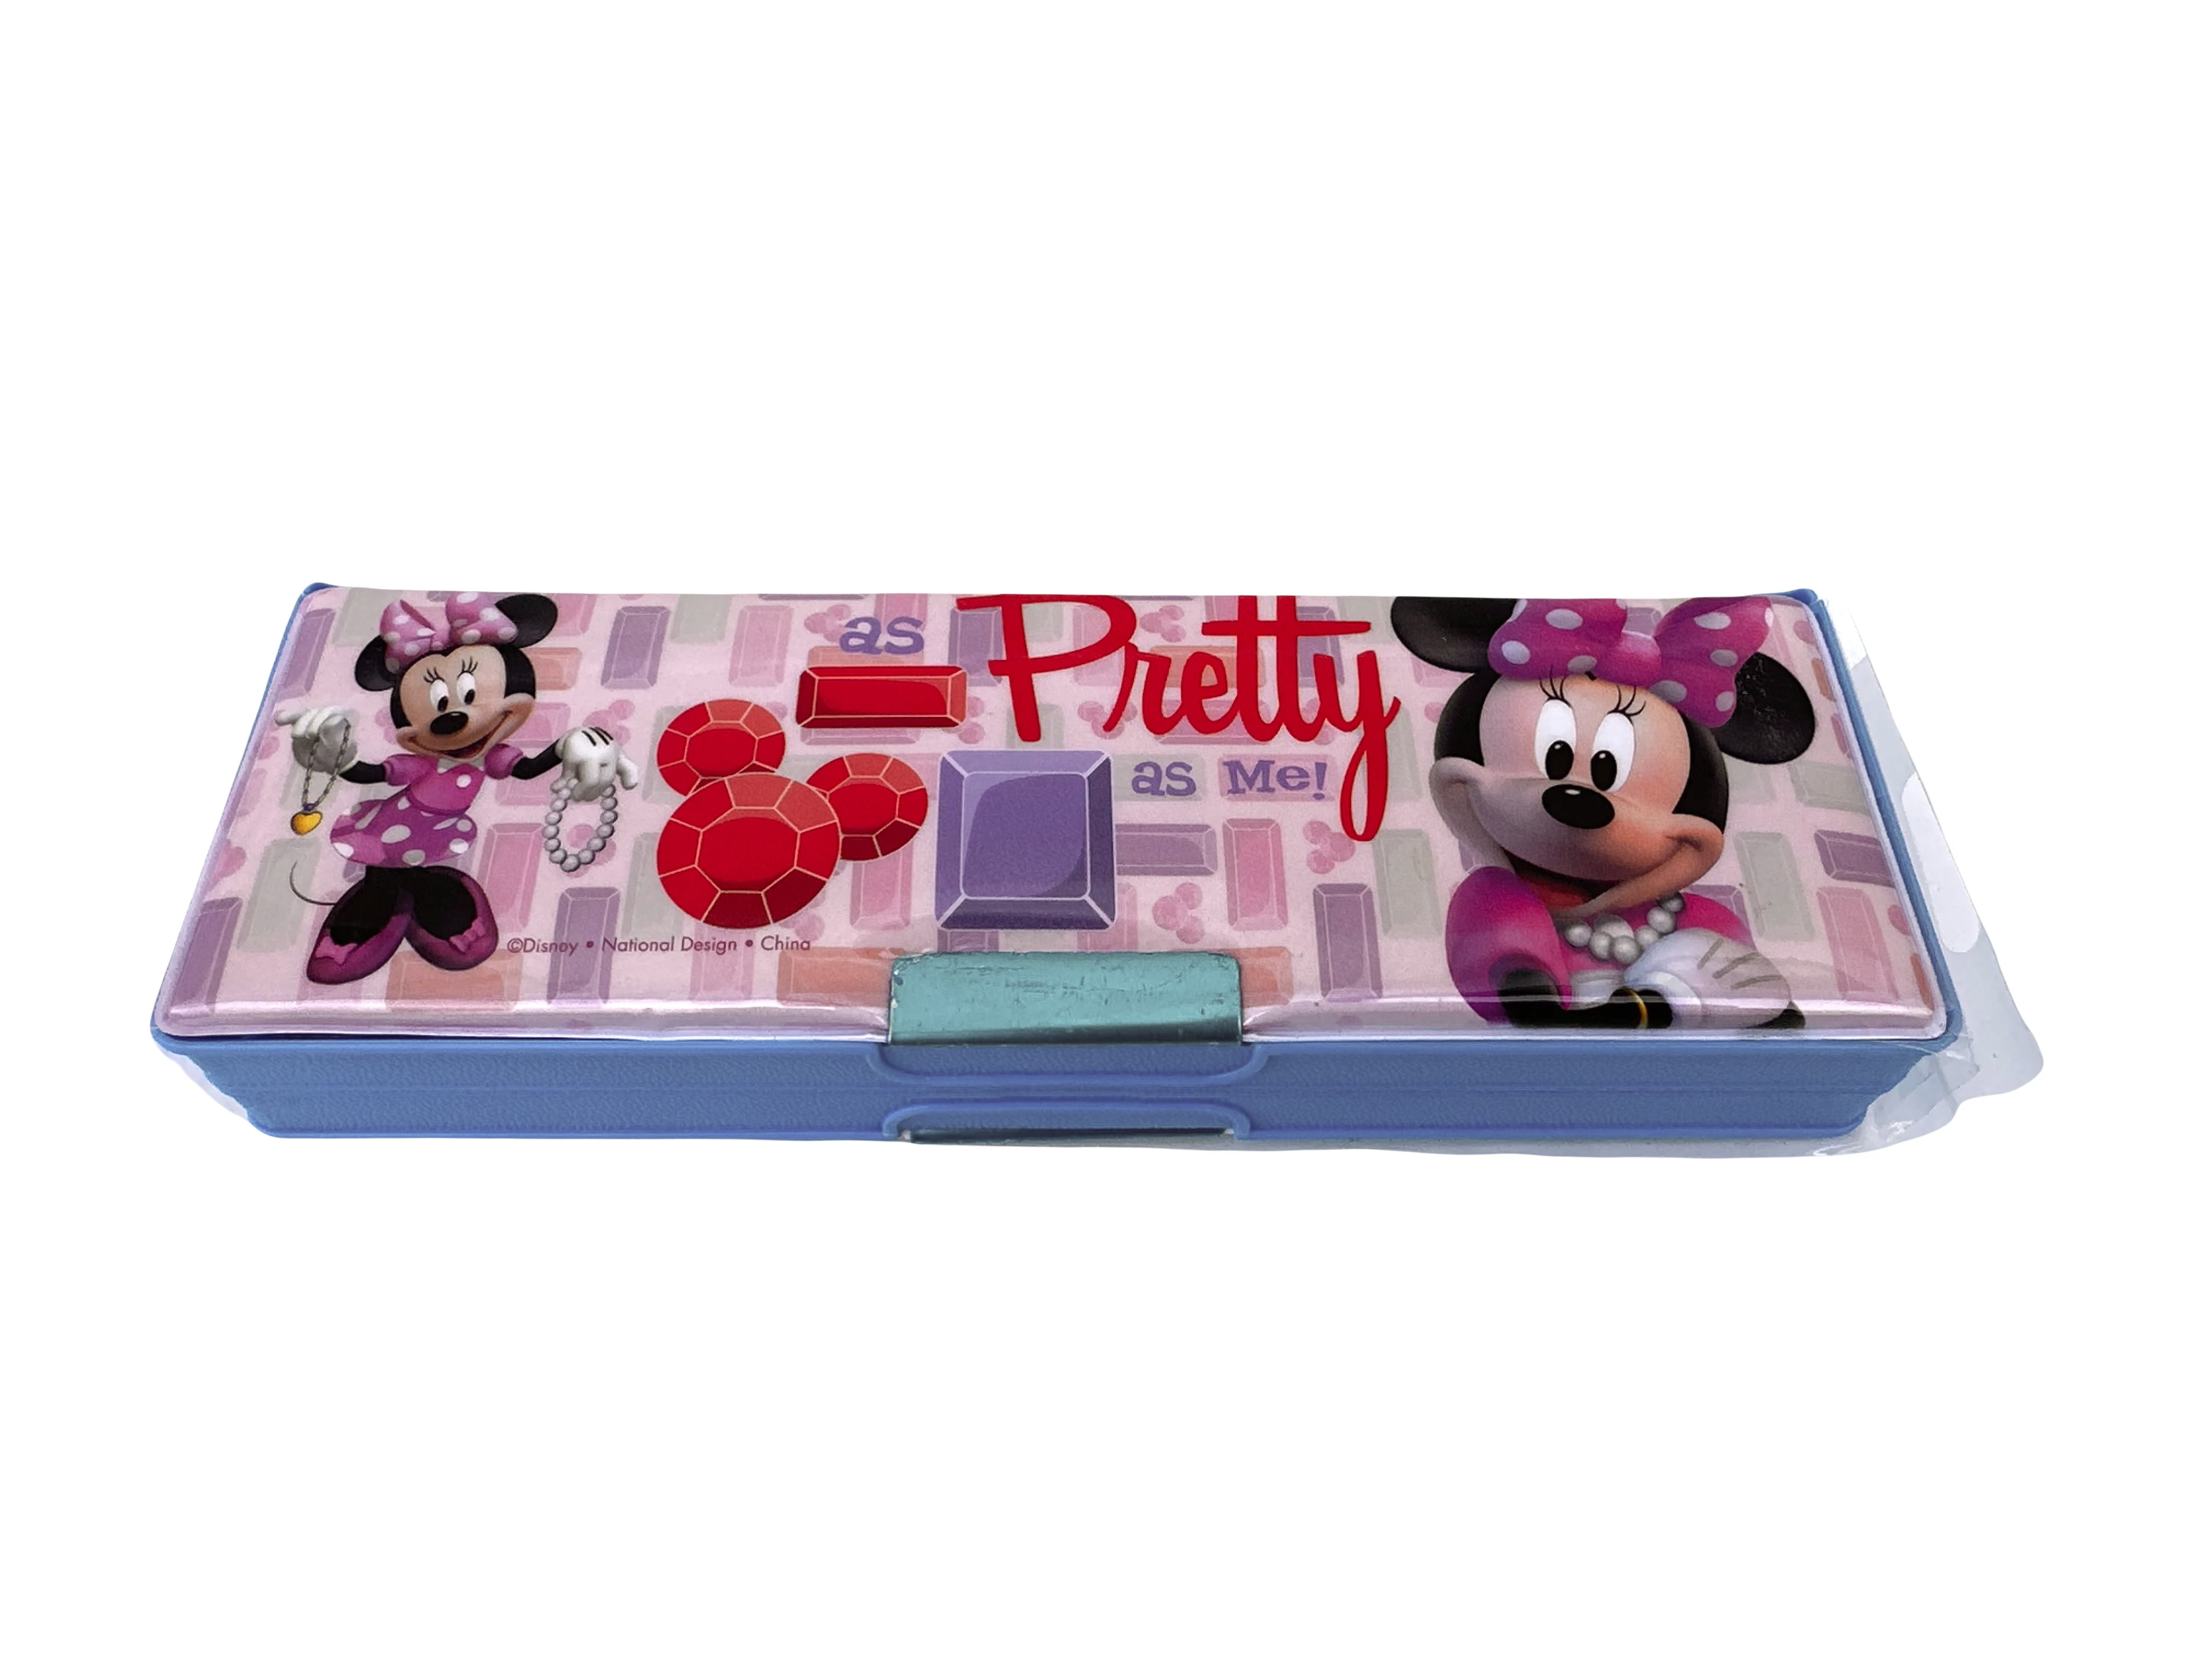 PHOTOS: New Disney Princess, Stitch, and Minnie Mouse Pencil Cases  Available at Walt Disney World - WDW News Today